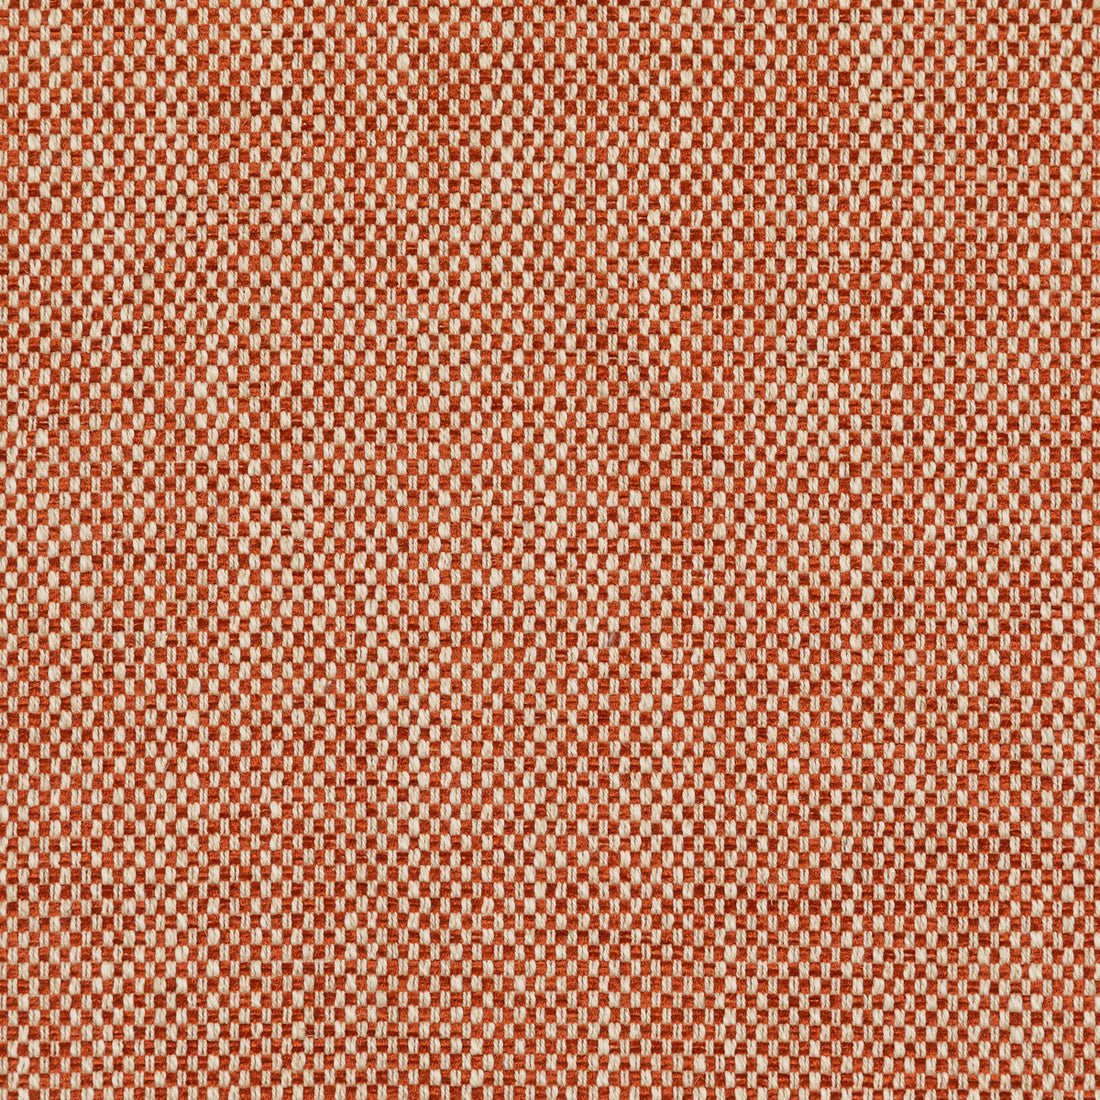 Carlton fabric in rust color - pattern BFC-3692.24.0 - by Lee Jofa in the Blithfield collection